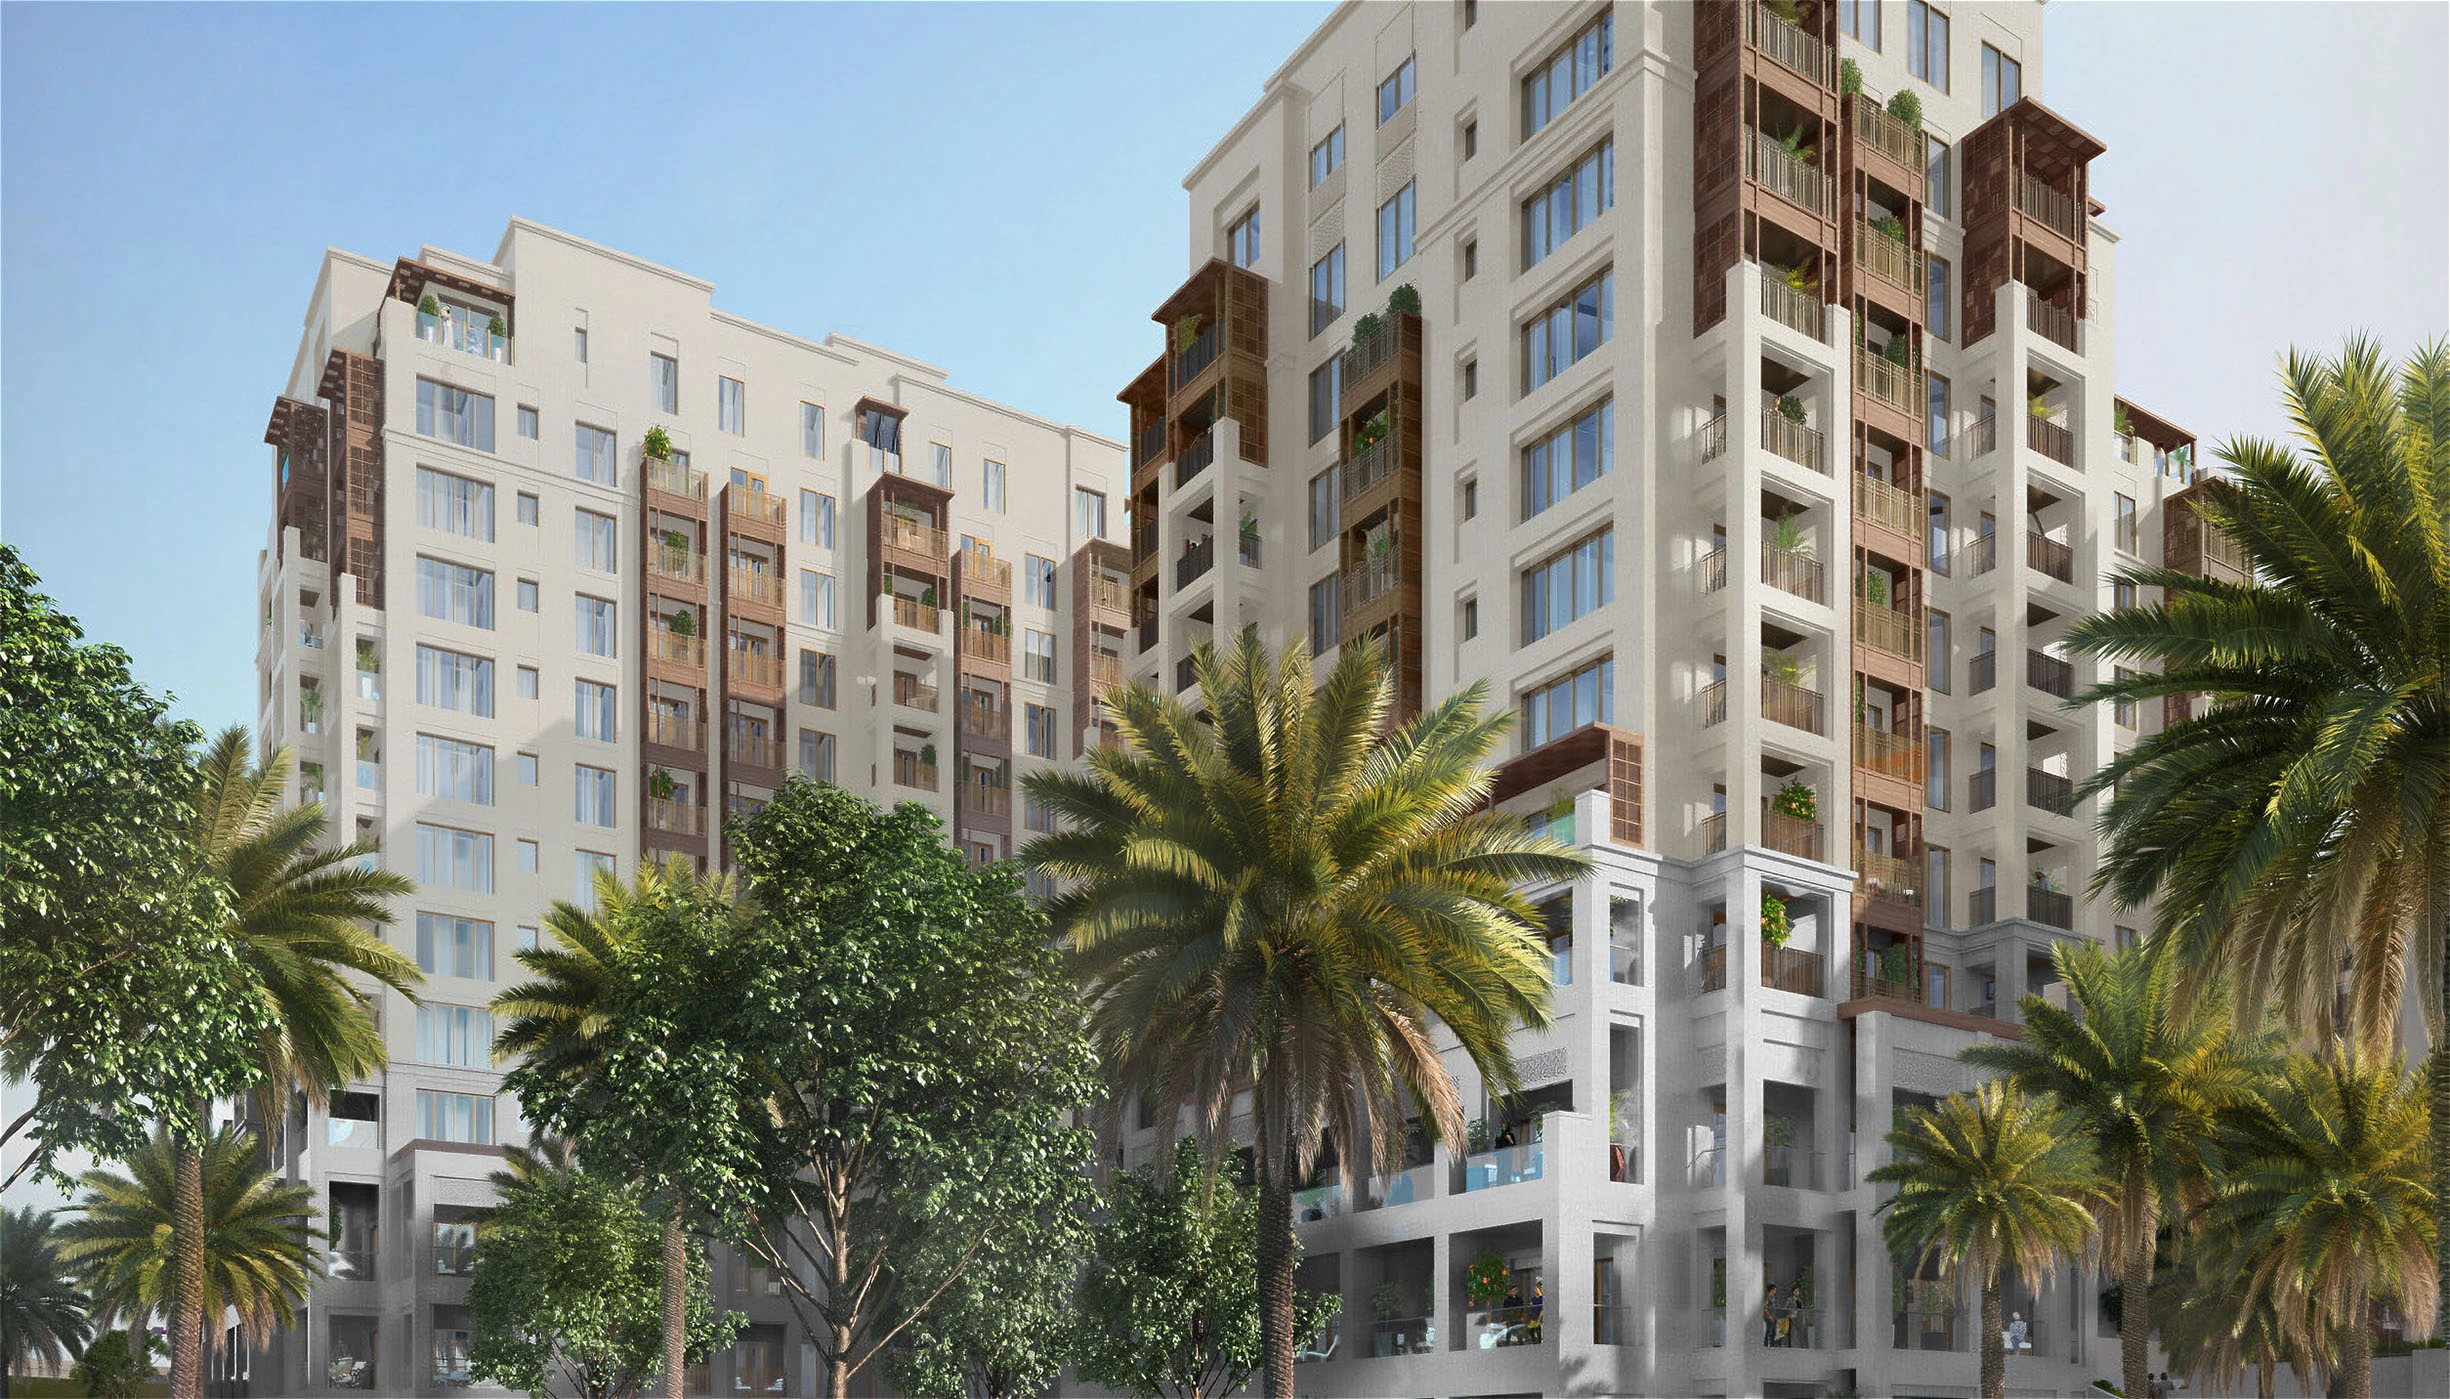 Mangrove at Creek Beach (DCH) Dubai, is a residential building curiously created for residents seeking impeccable features. Book your space now.